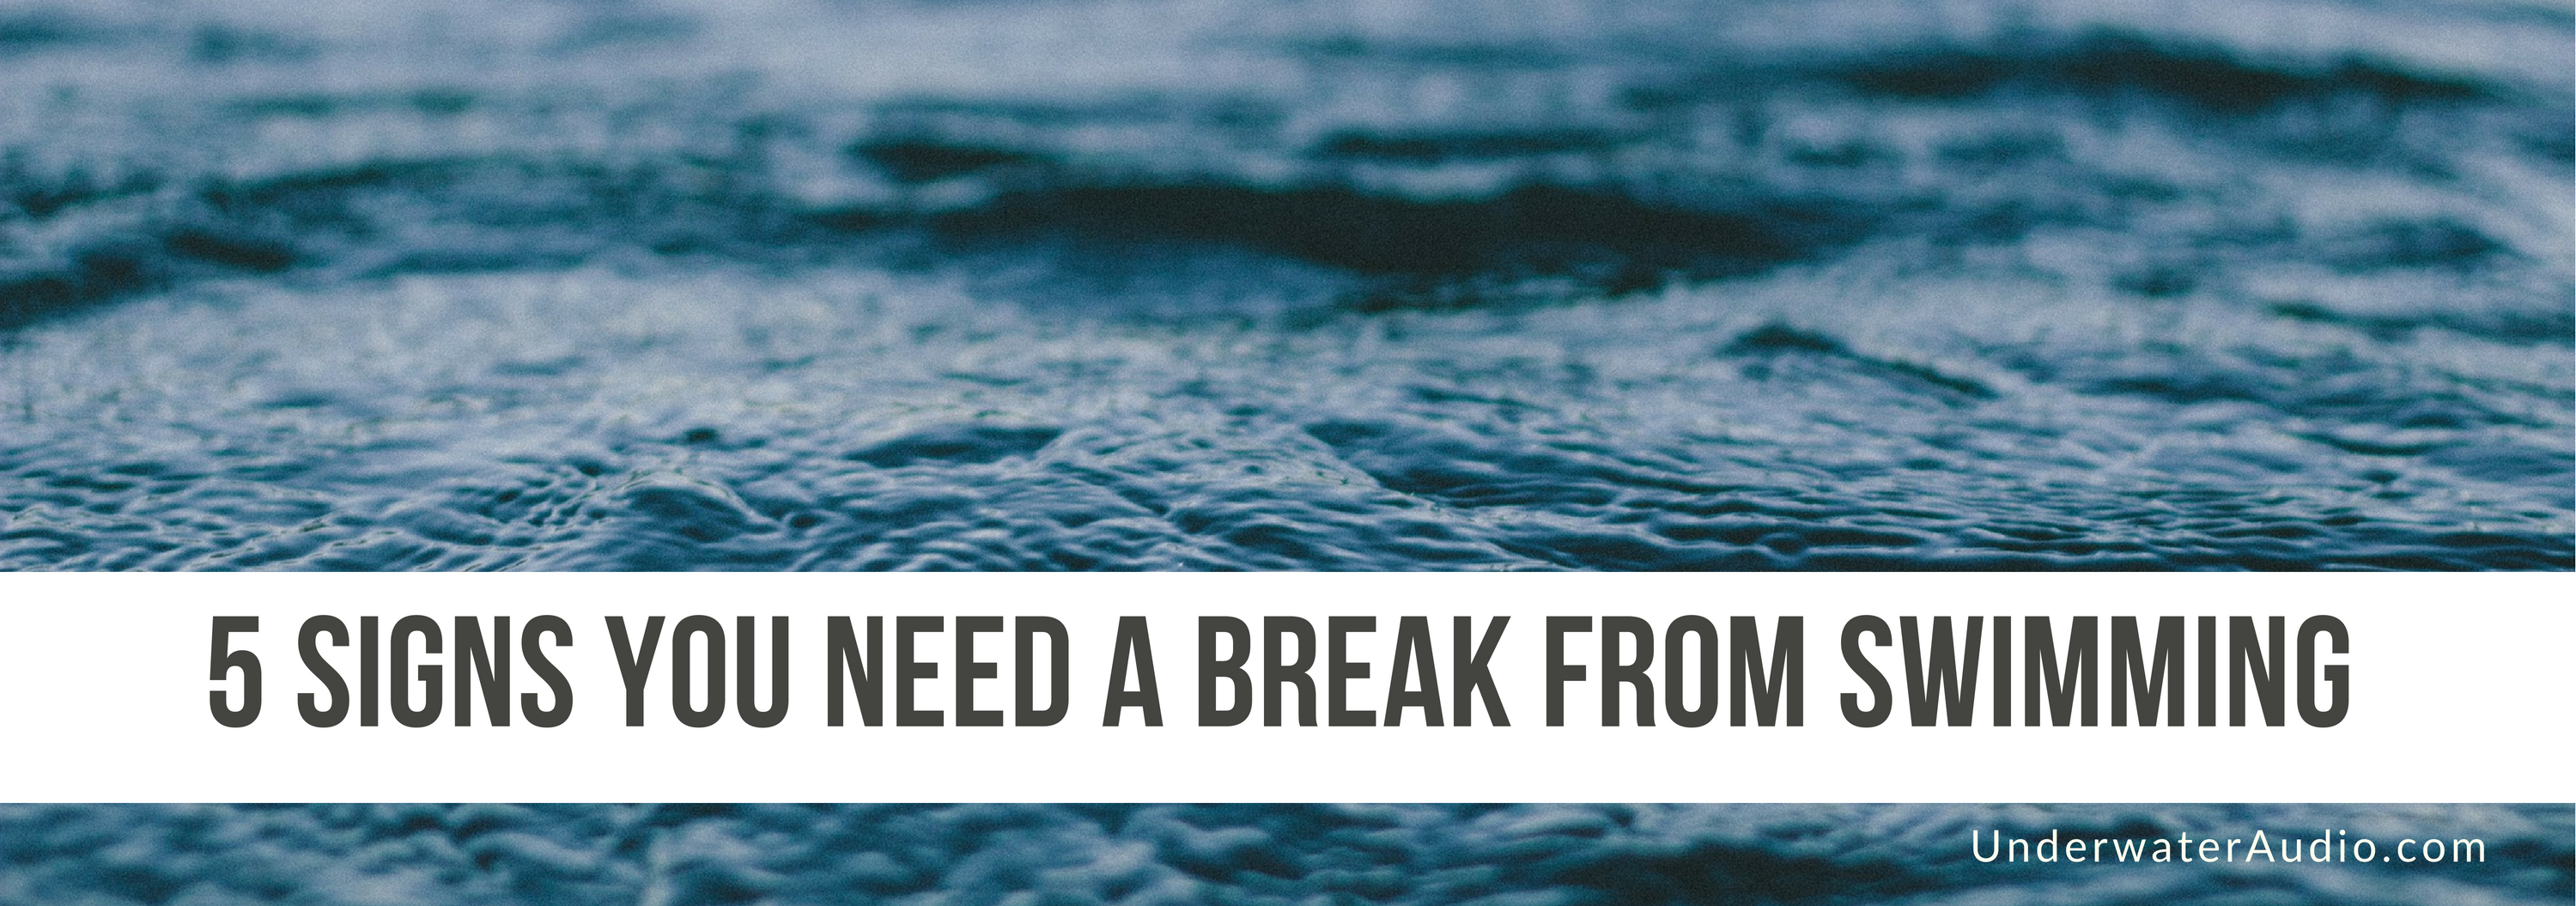 5 Signs You Need a Break From Swimming